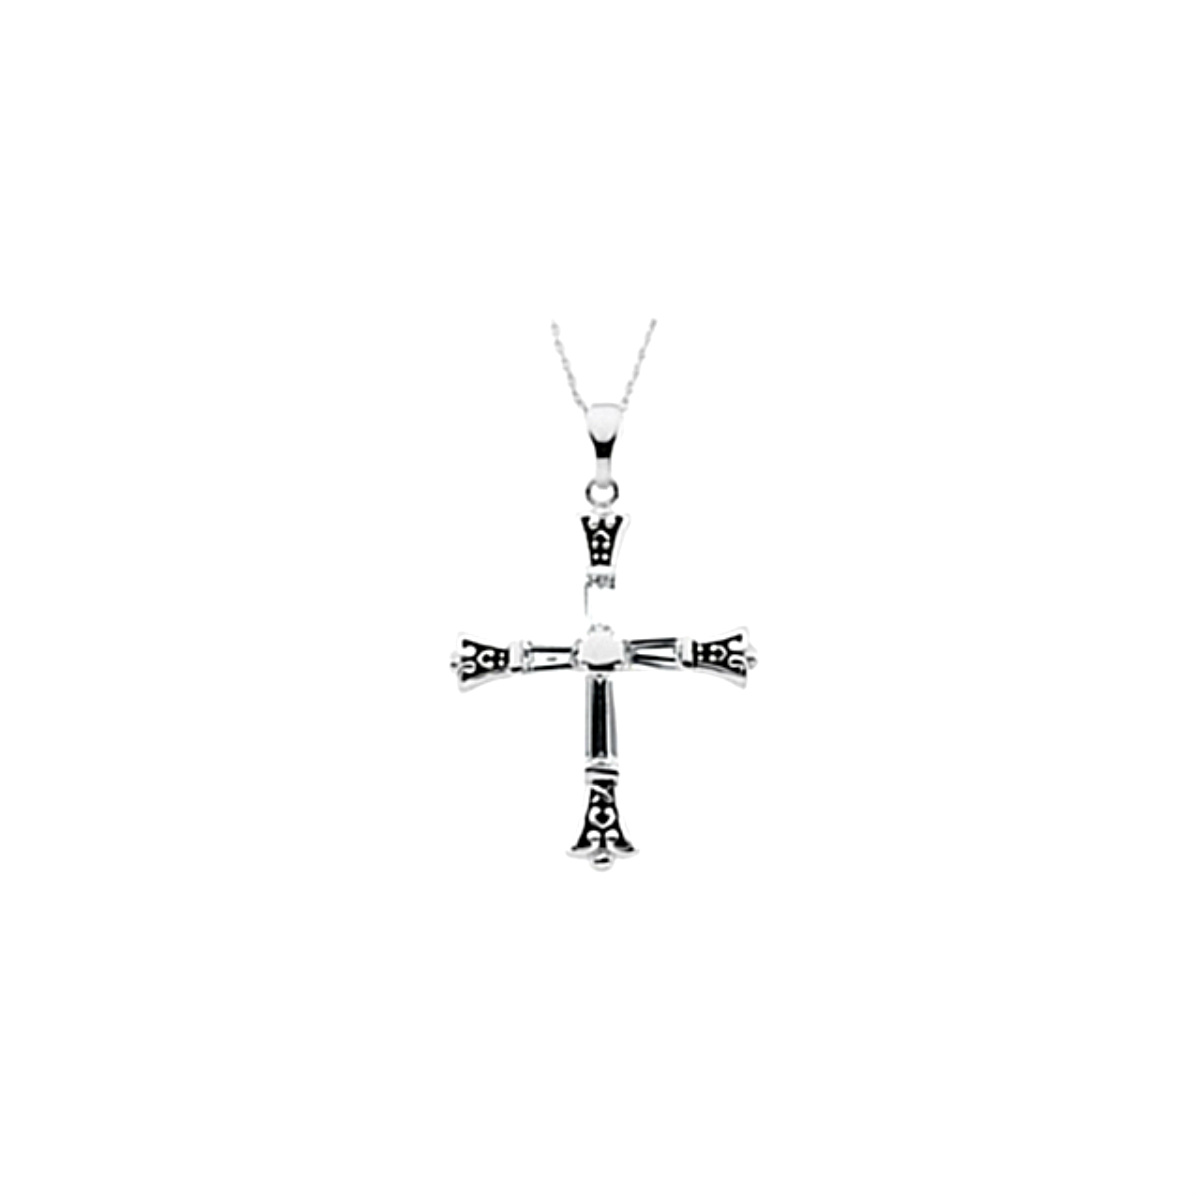 Forgiven Cross Pendant Rhodium Plate Sterling Silver Necklace.